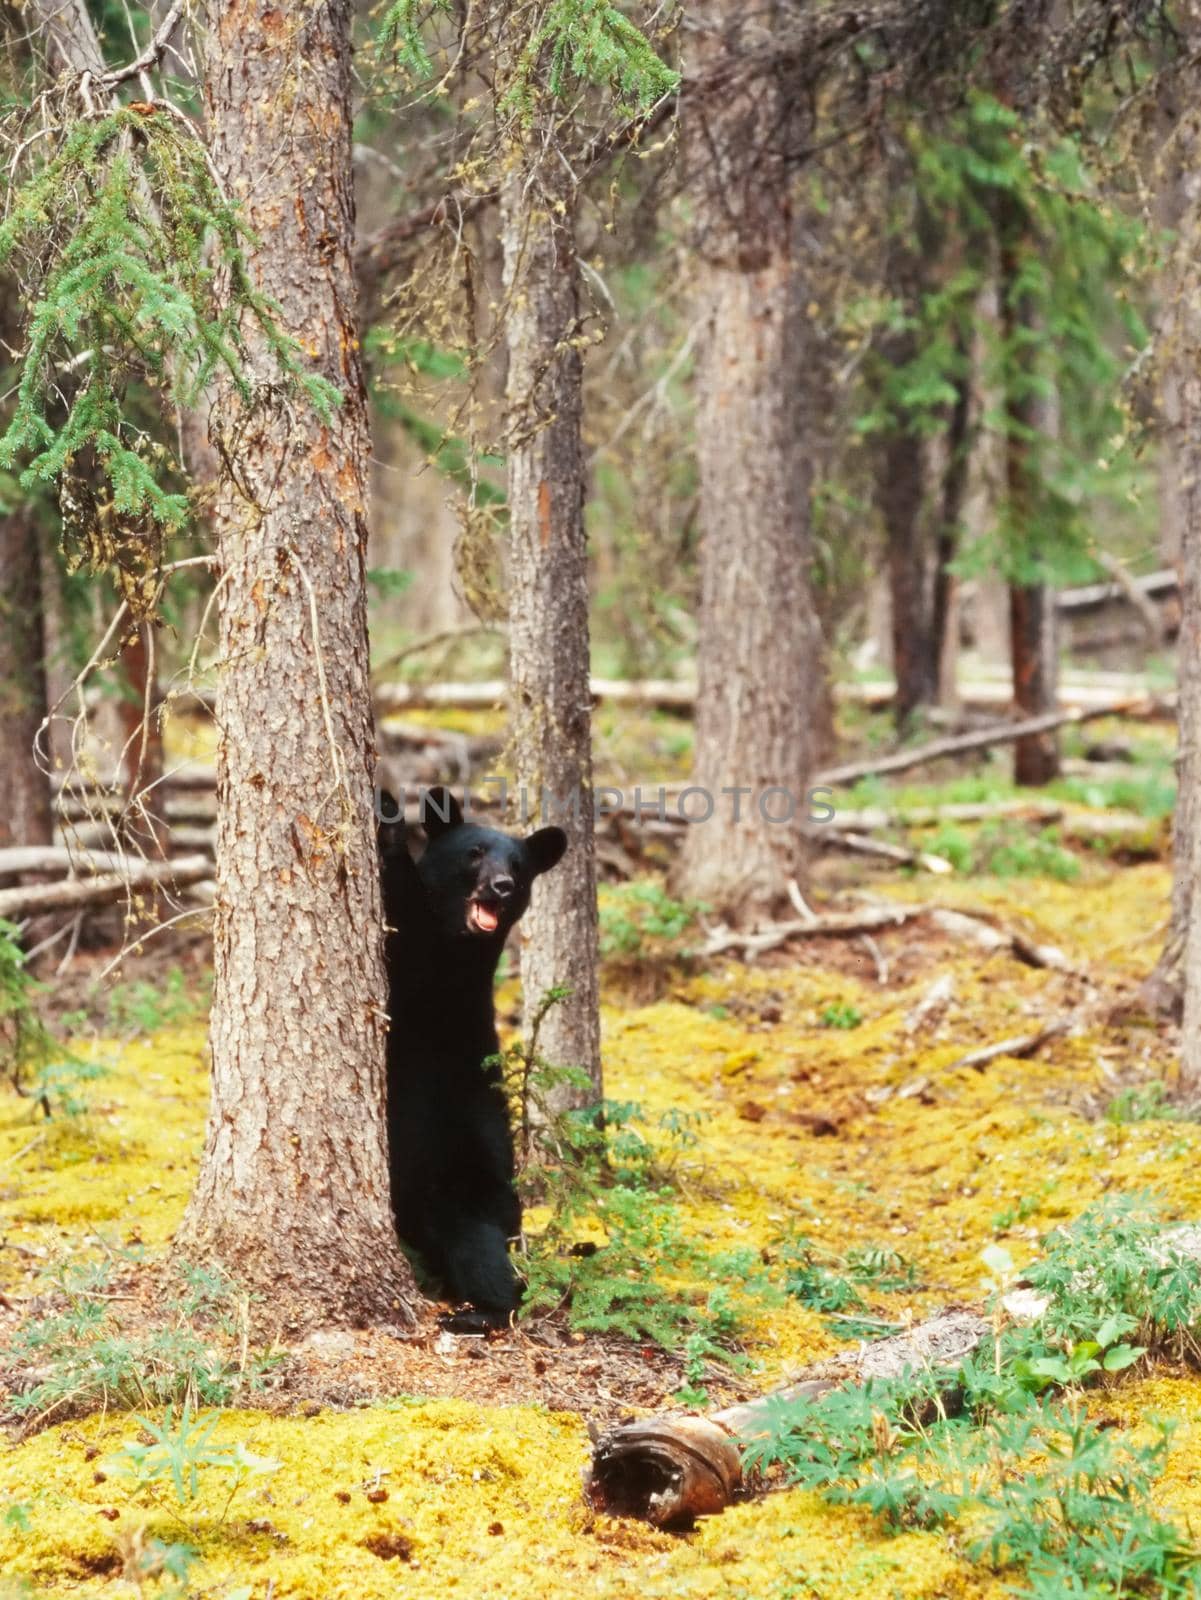 Young yearling Black Bear, Ursus americanus, sitting playful at tree trunk in Yukon Territory, Canada, boreal forest taiga